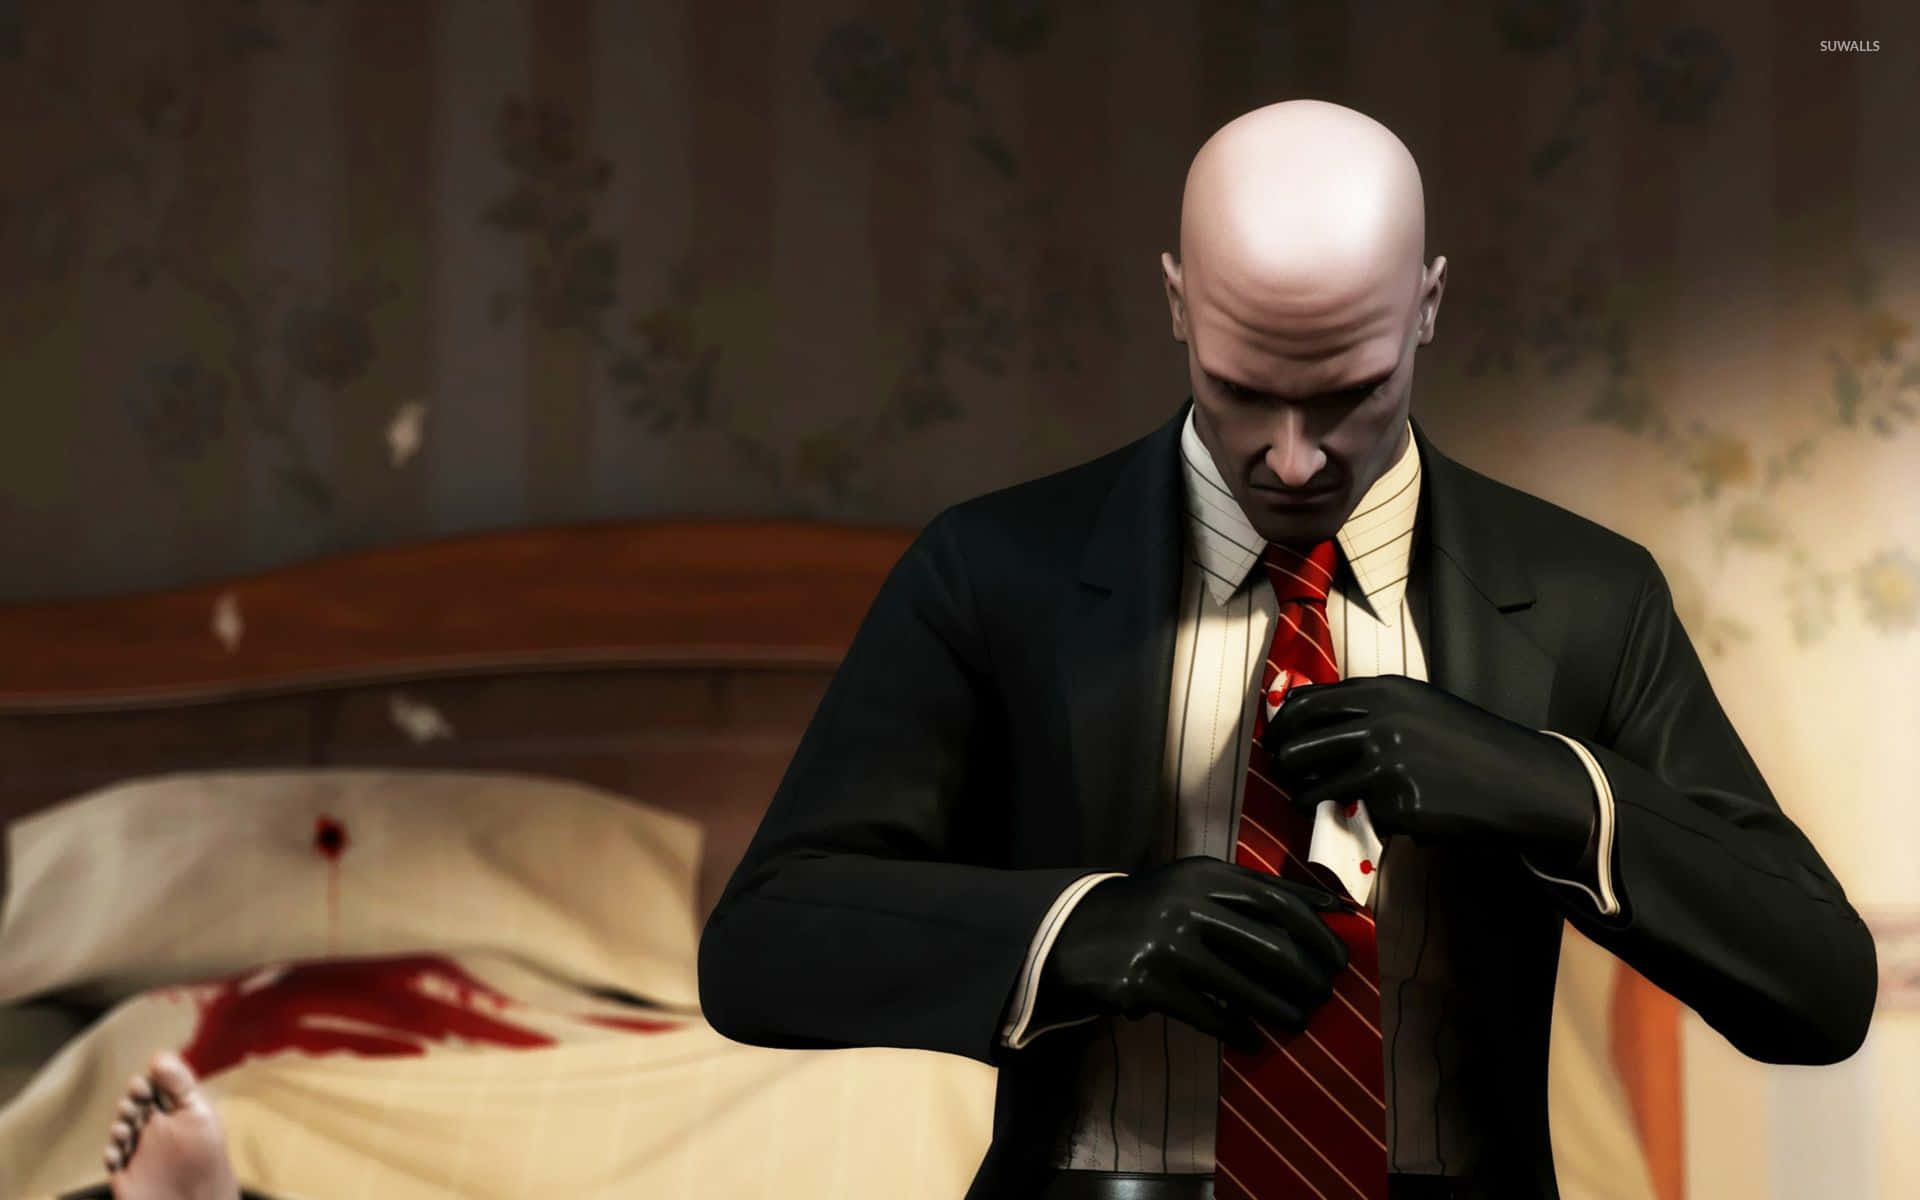 Enter the world of Hitman Absolution